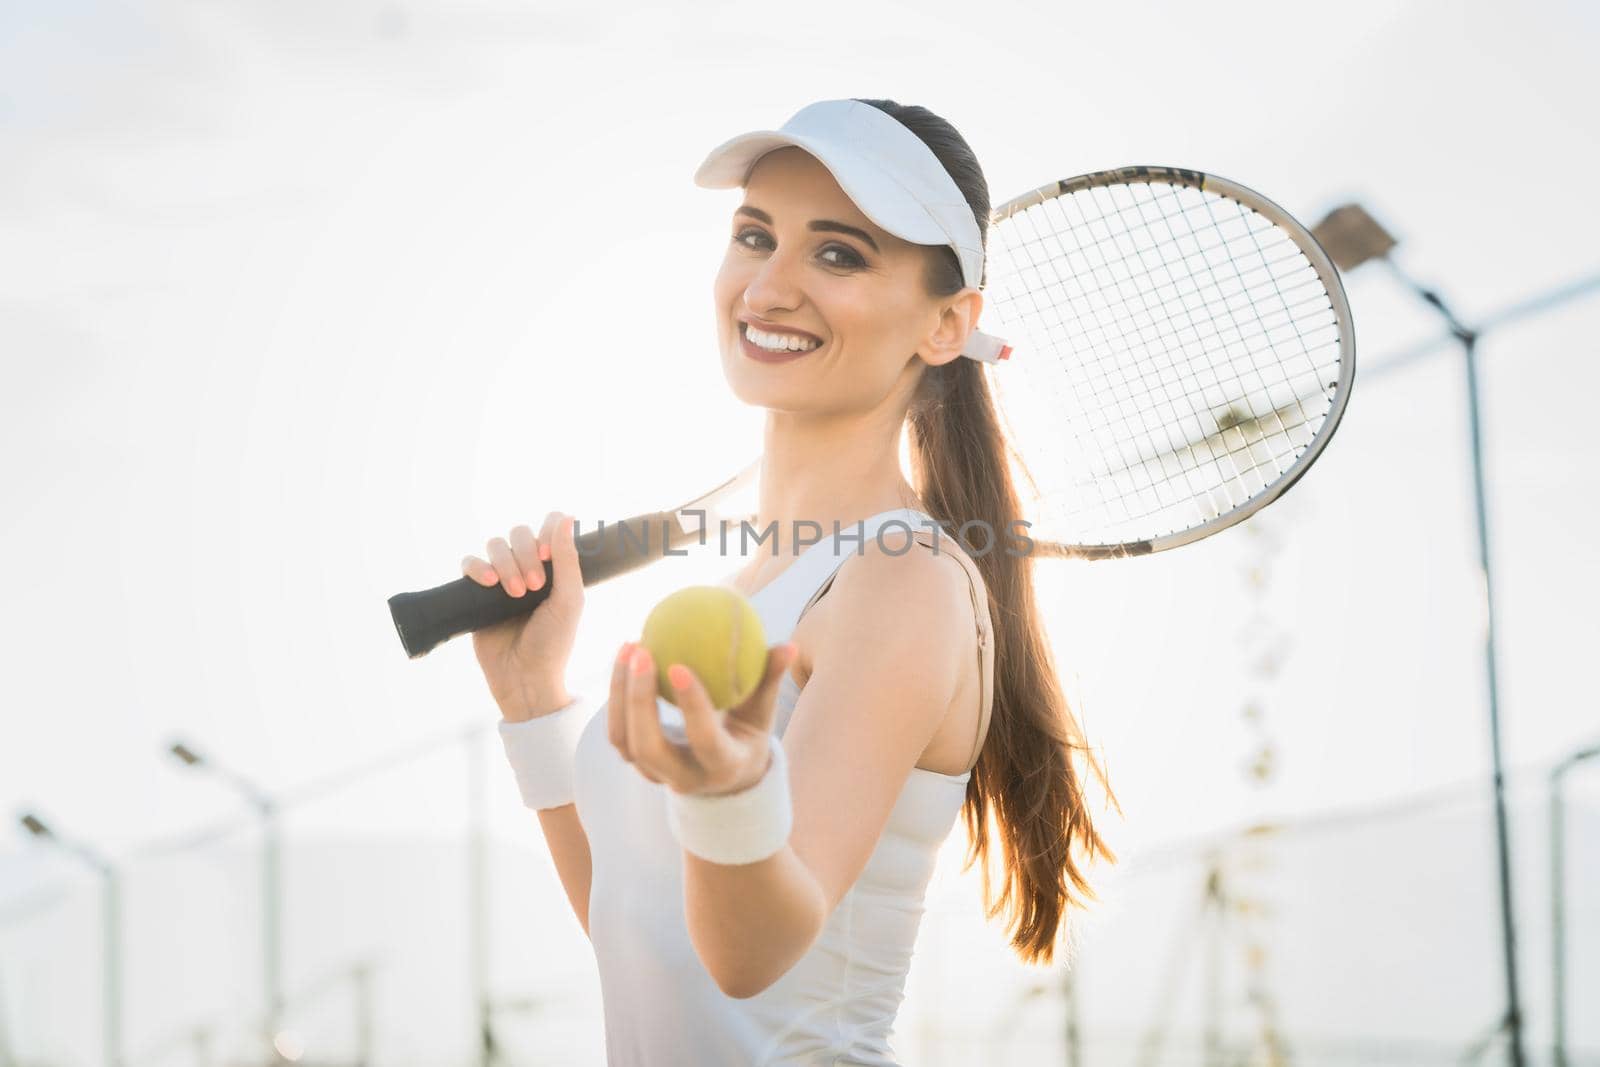 Woman going about playing Tennis showing the ball